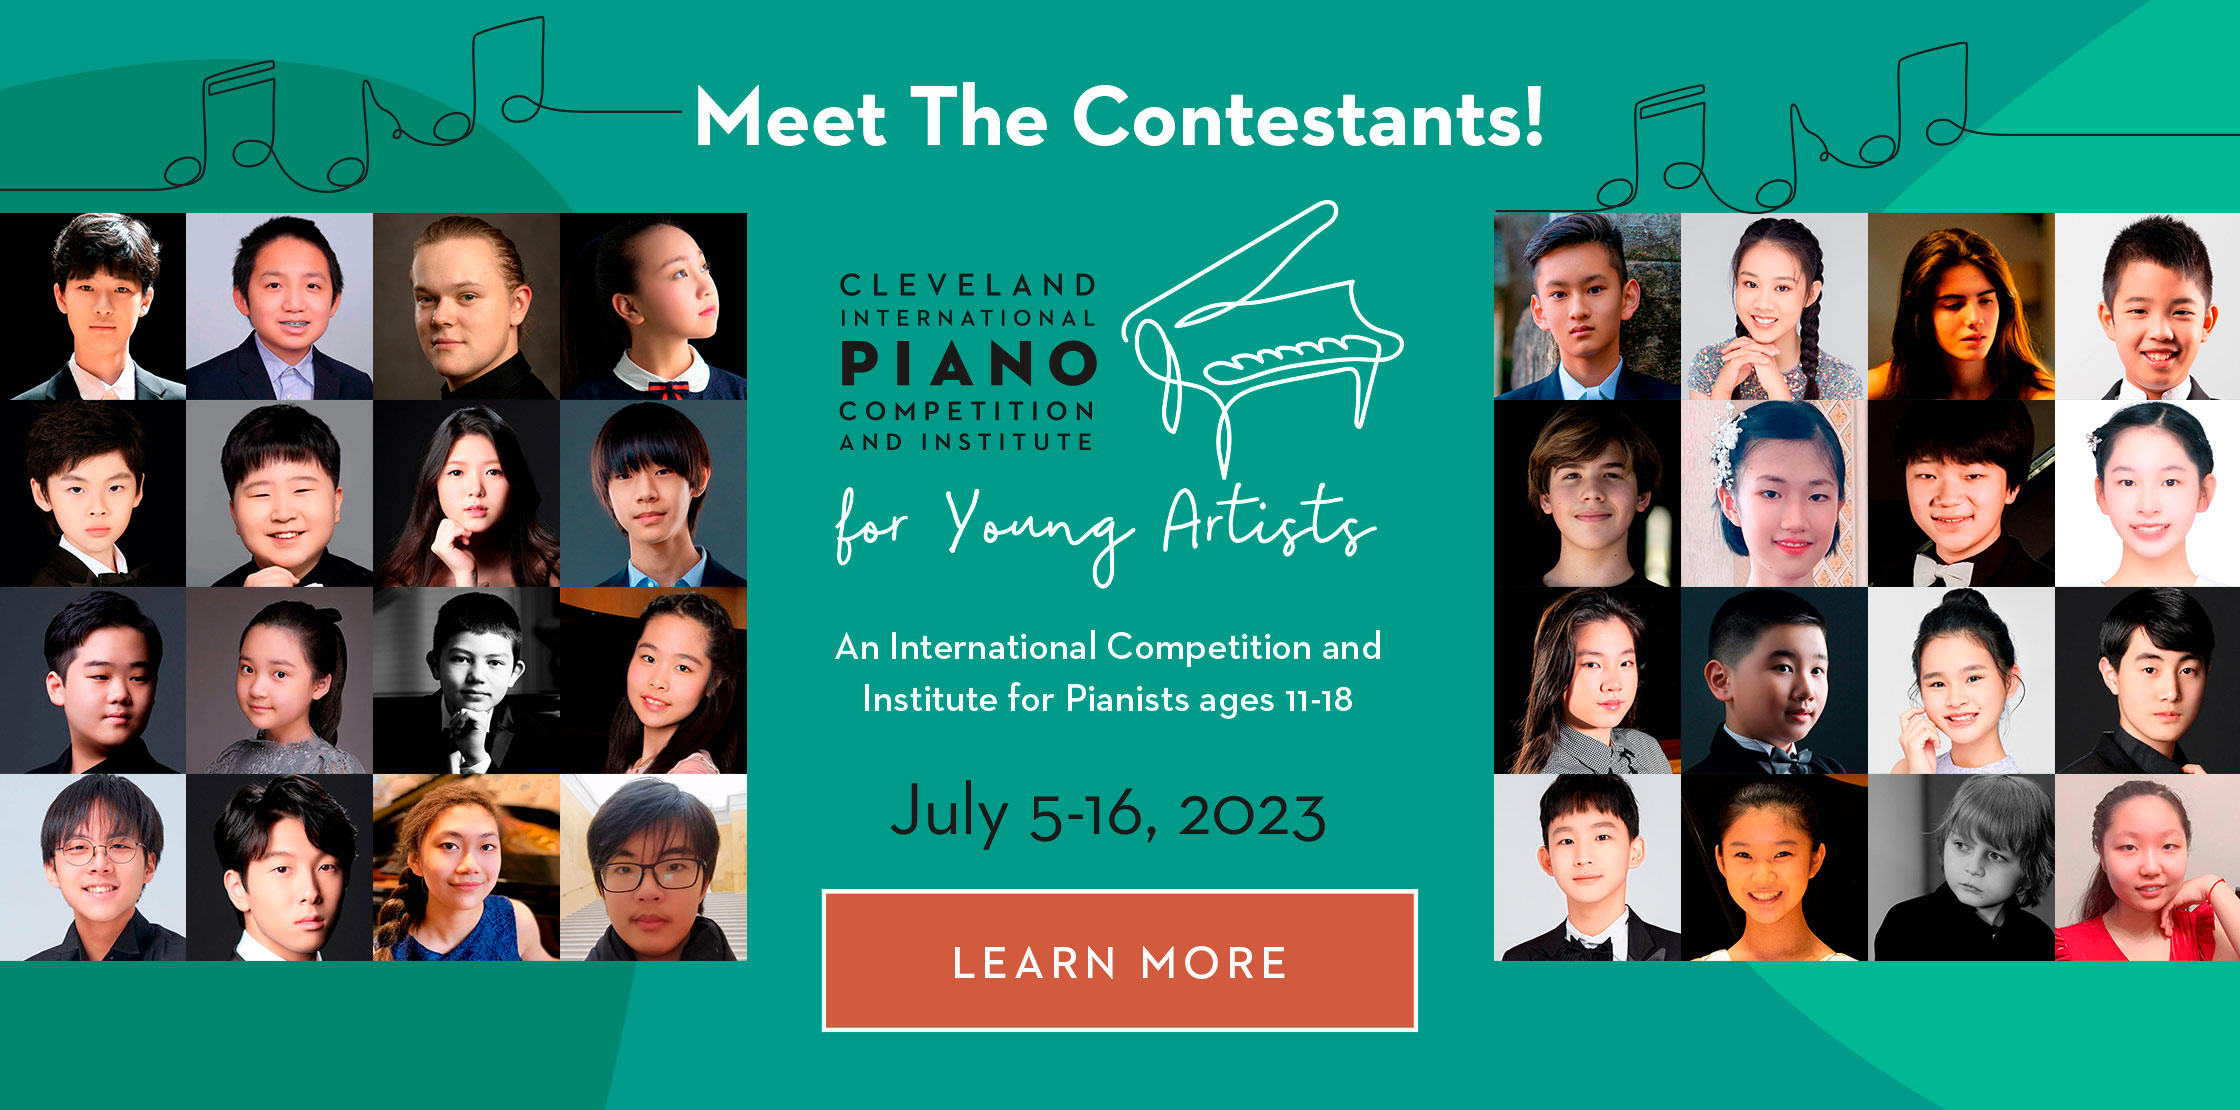 Cleveland International Piano Competition for Young Artists 2023